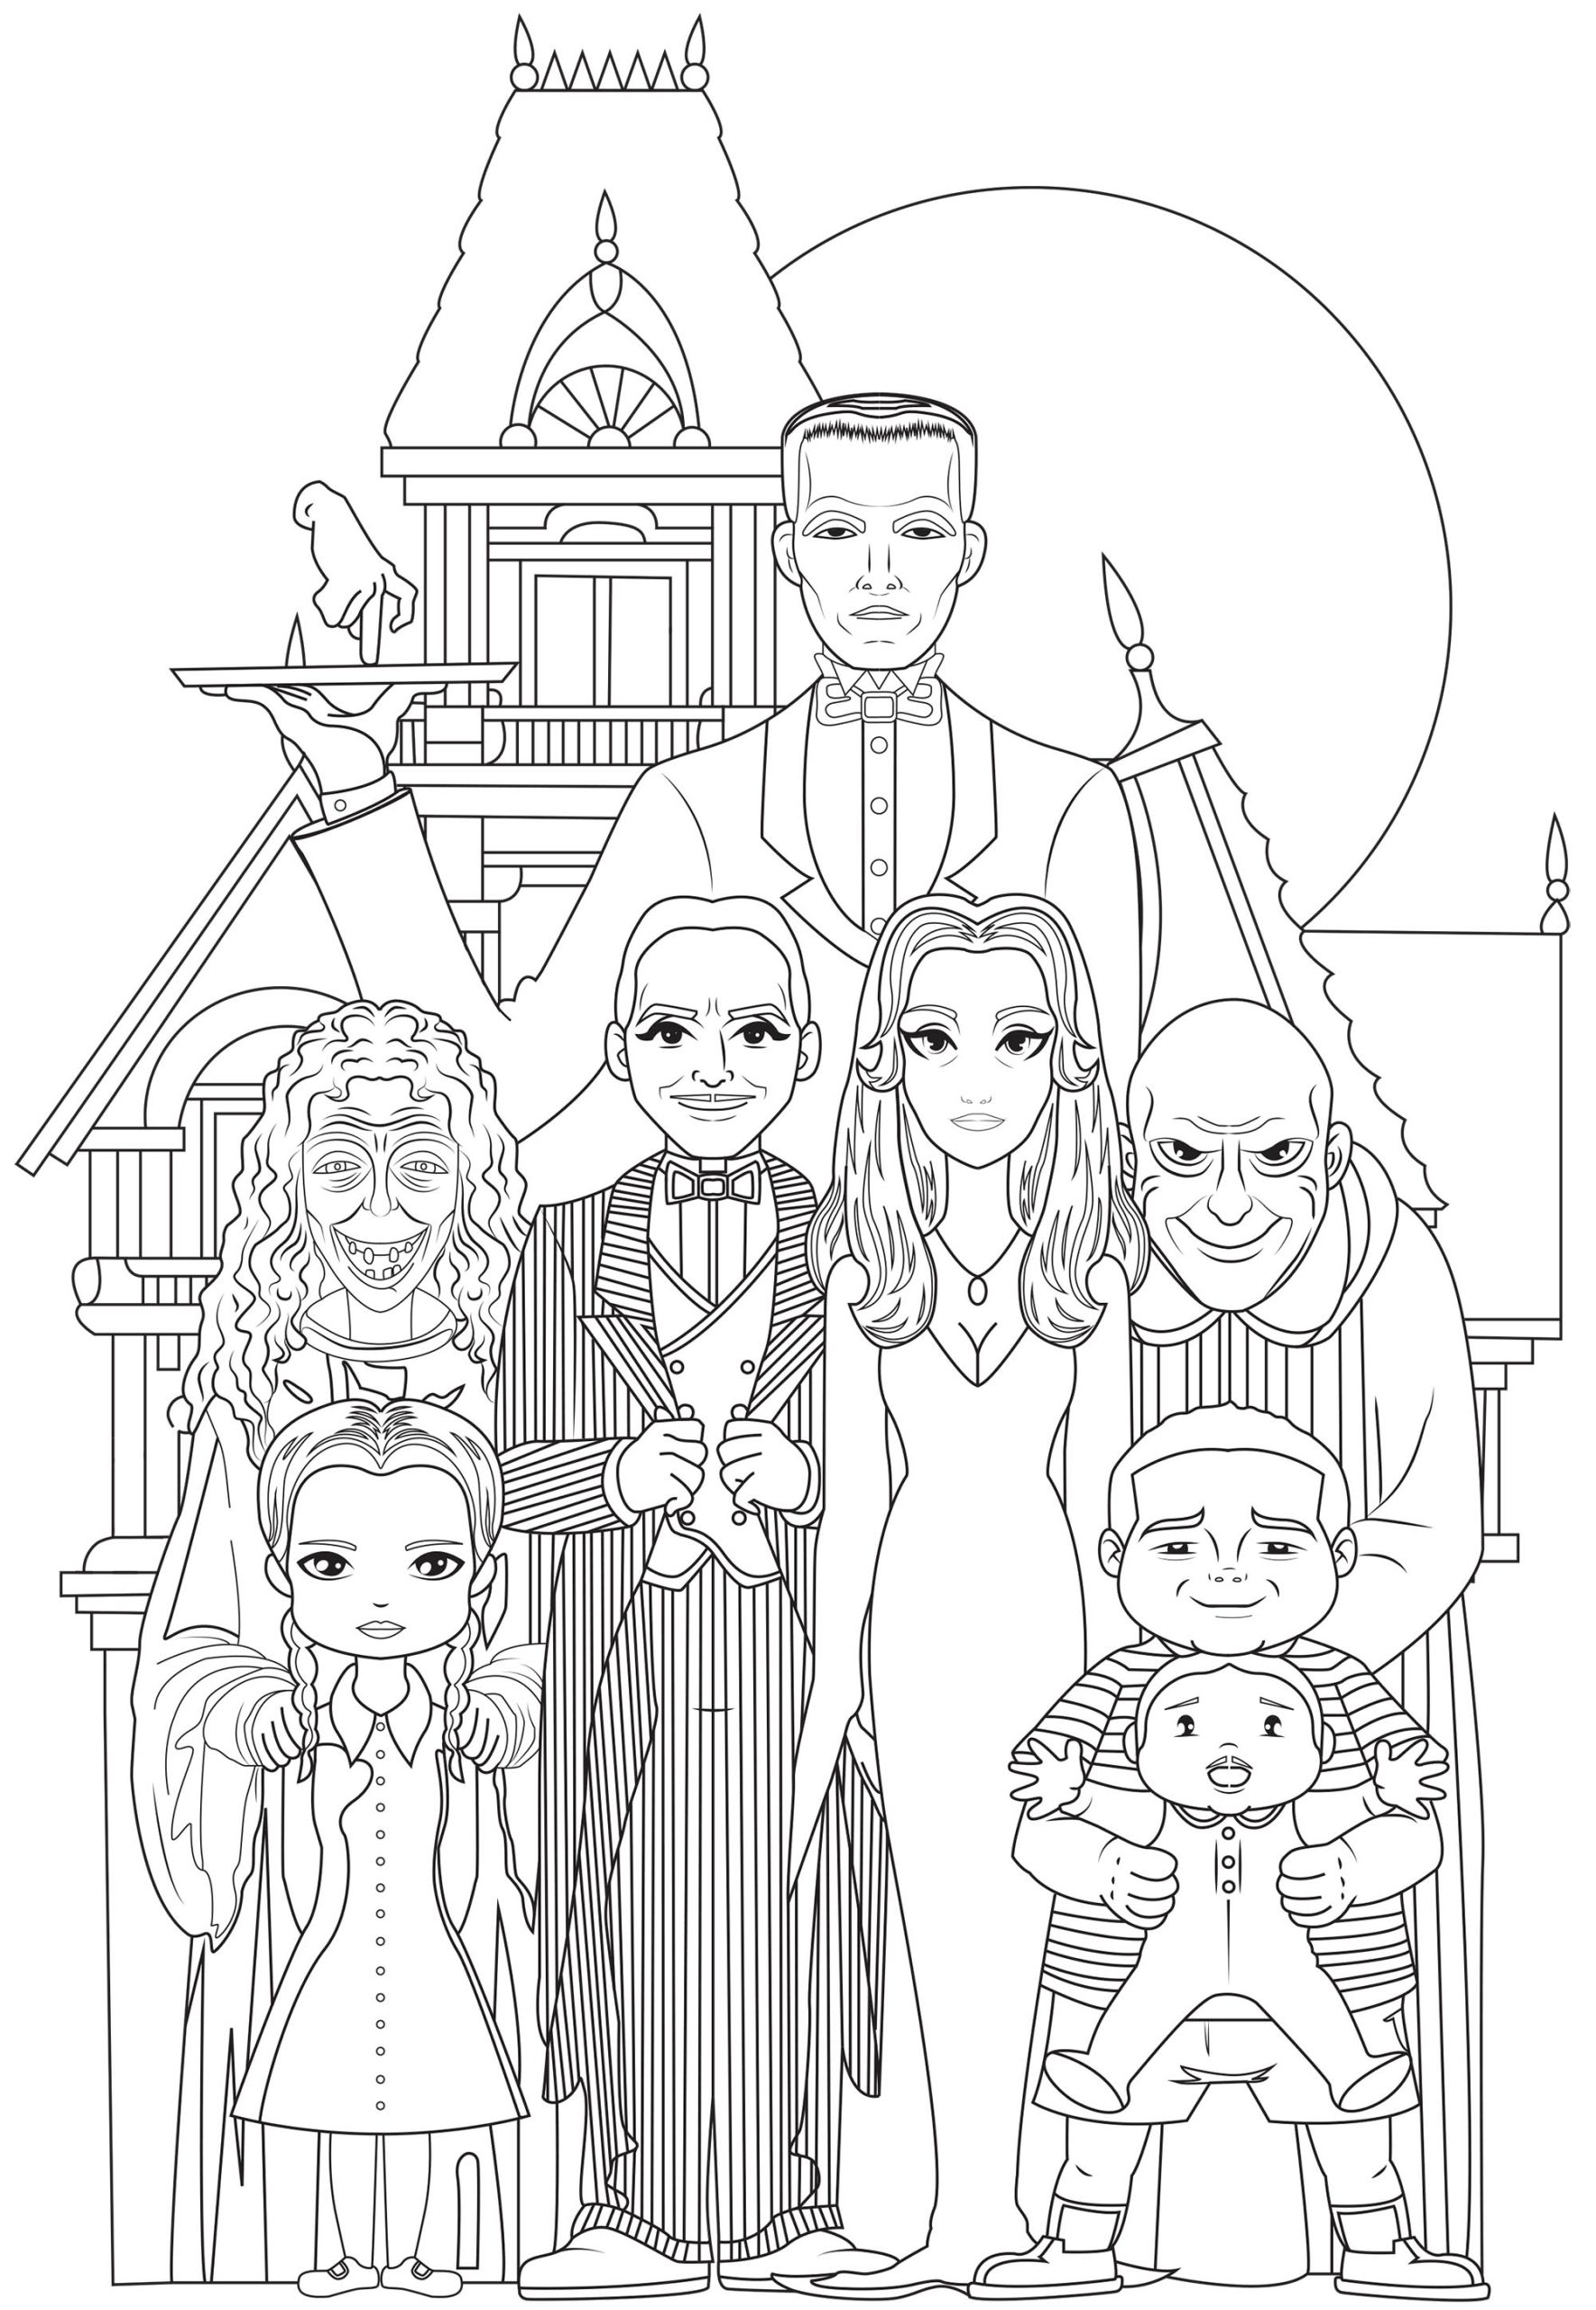 Wednesday addams coloring pages ã imprimer